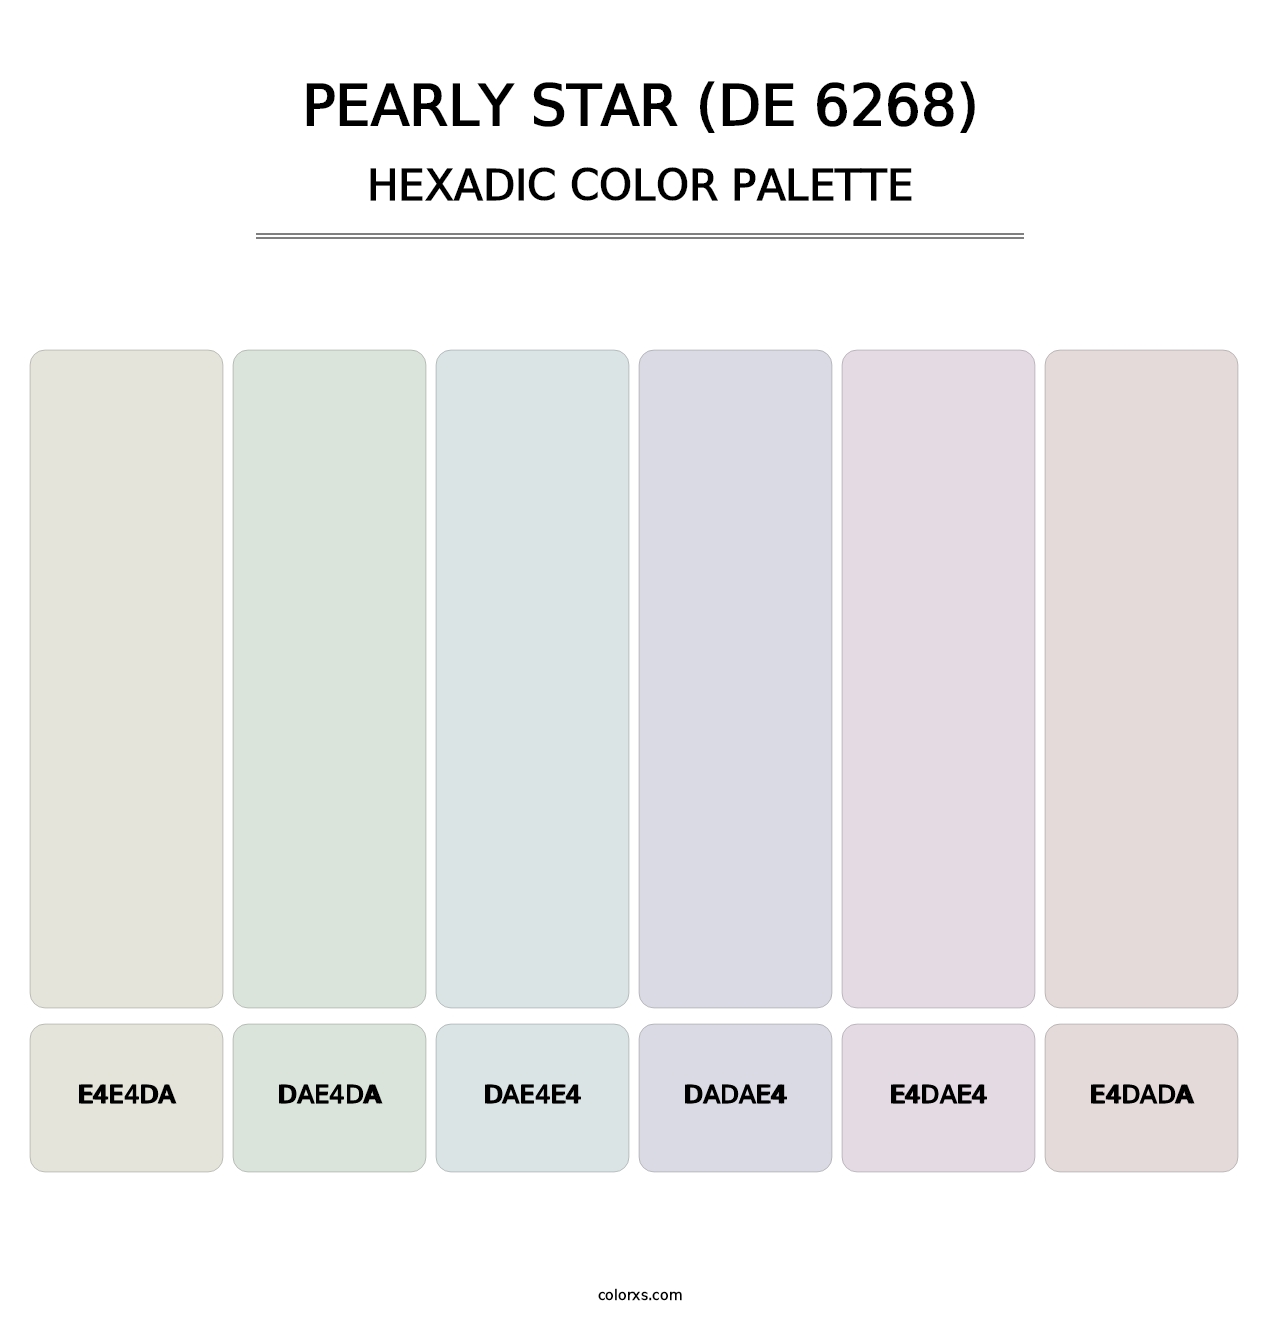 Pearly Star (DE 6268) - Hexadic Color Palette